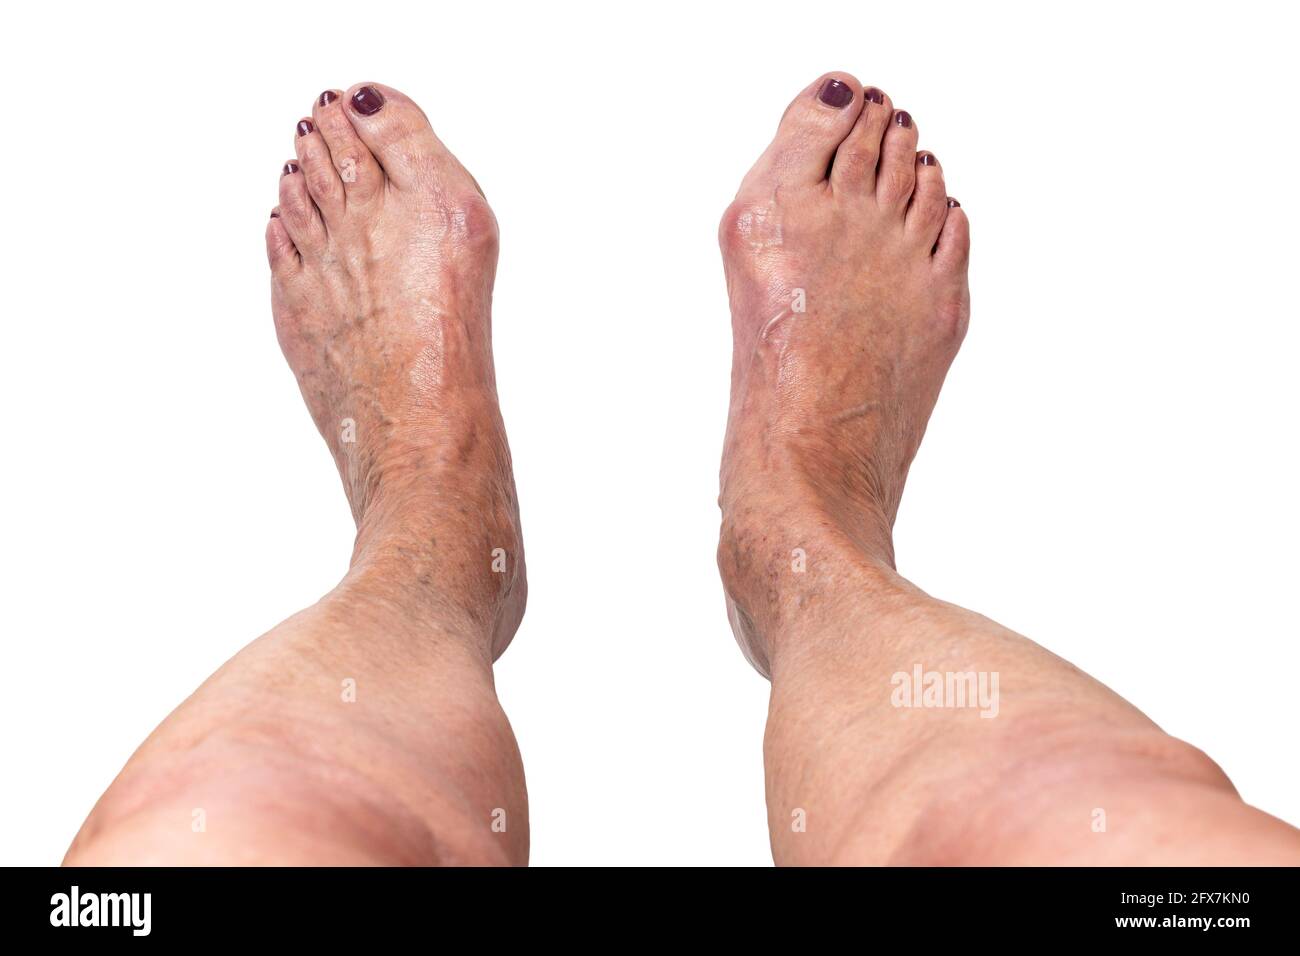 Hallux valgus, bunion on elderly woman's feet isolated on white background. Painful toe joint deformity with misalignment of toes. Close-up, top view. Stock Photo